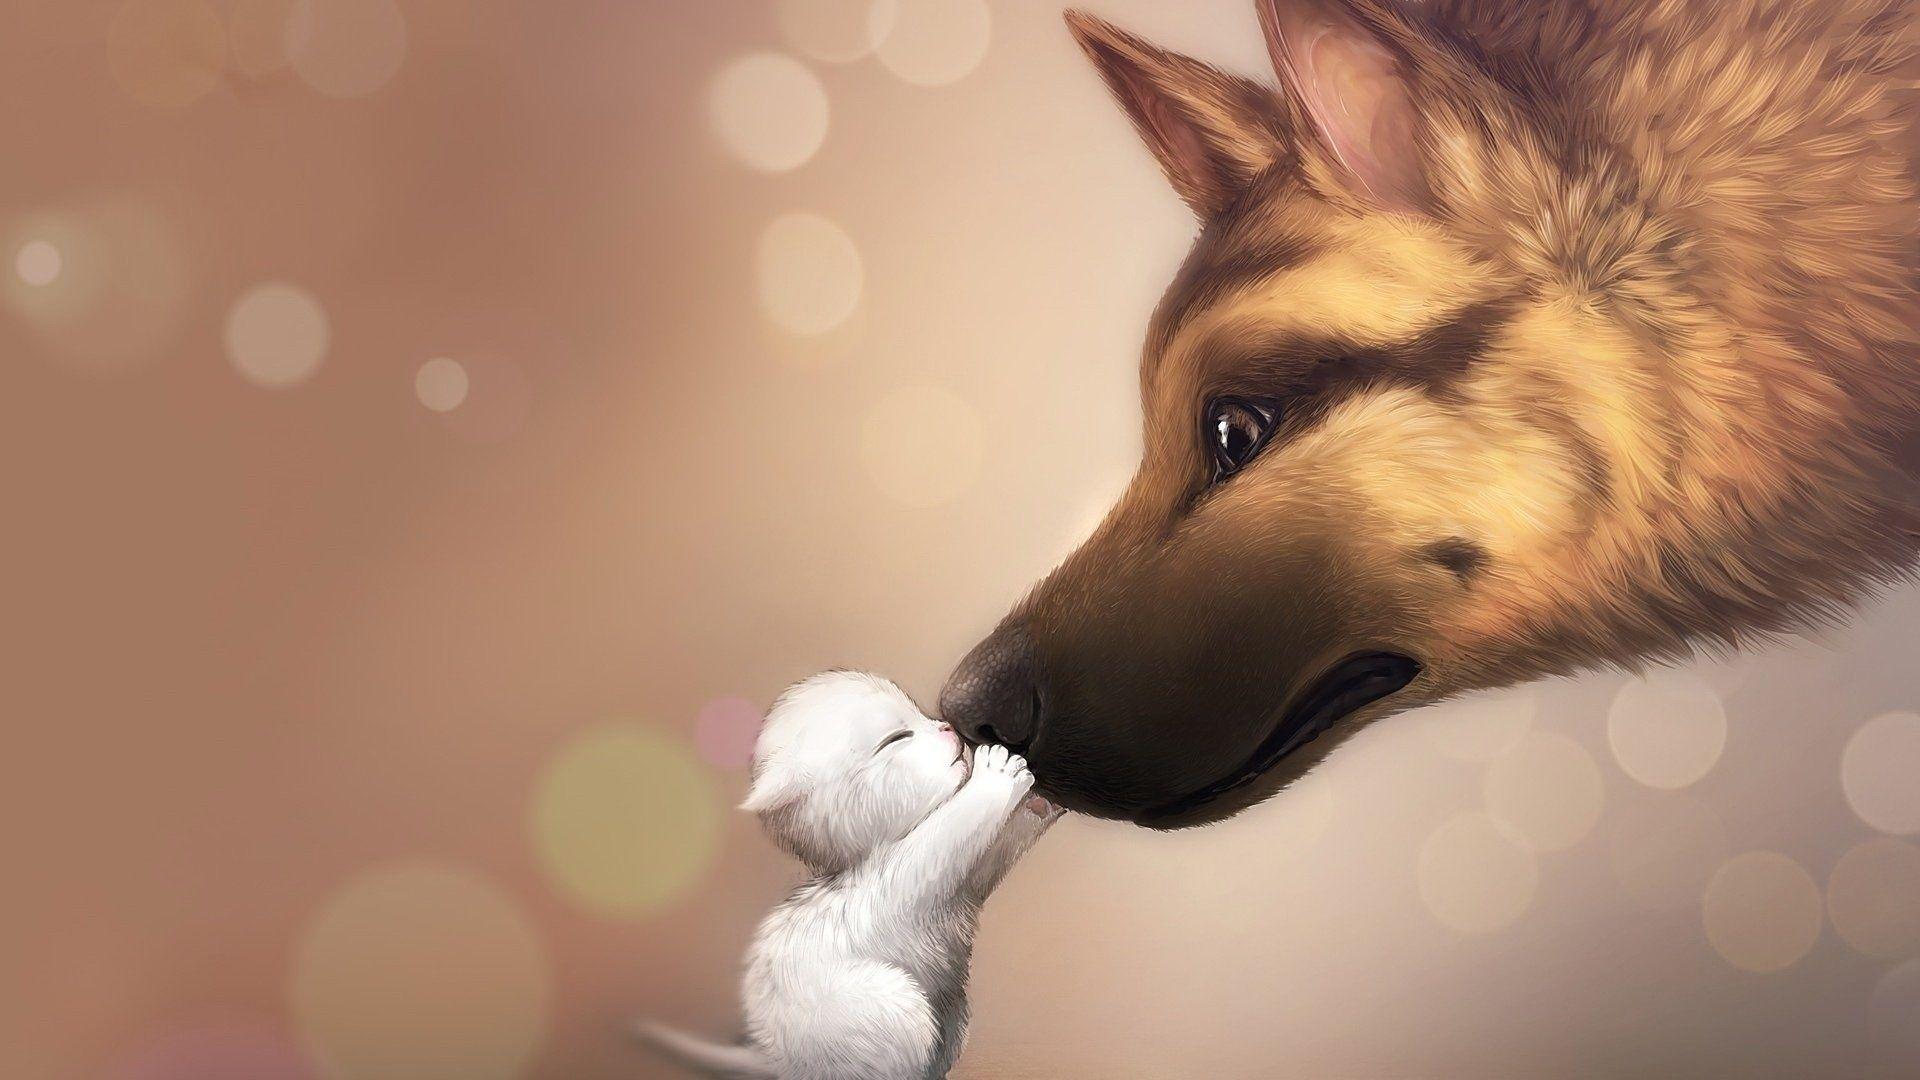 The 15 Greatest Anime Dogs of All Time